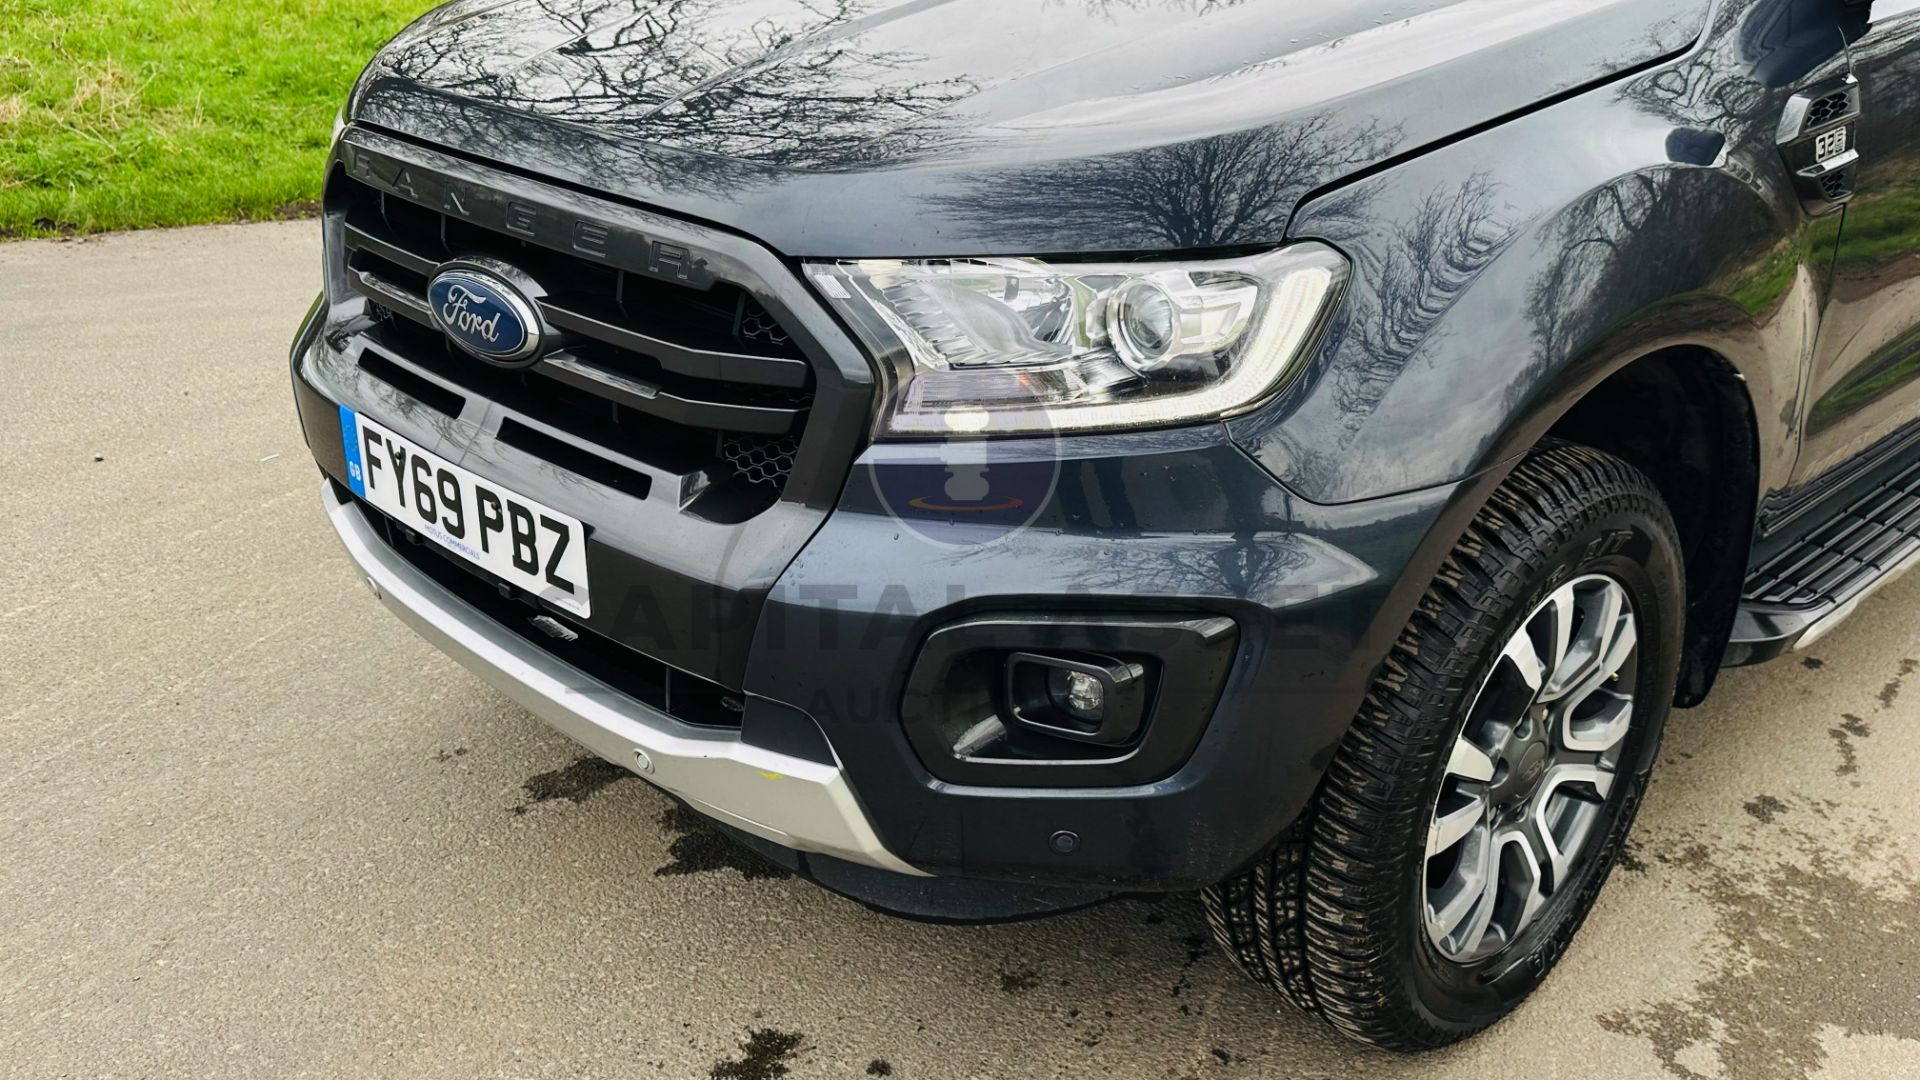 (On Sale) FORD RANGER *WILDTRAK EDITION* DOUBLE CAB PICK-UP (69 REG - EURO 6) 3.2 TDCI - AUTOMATIC - Image 19 of 49